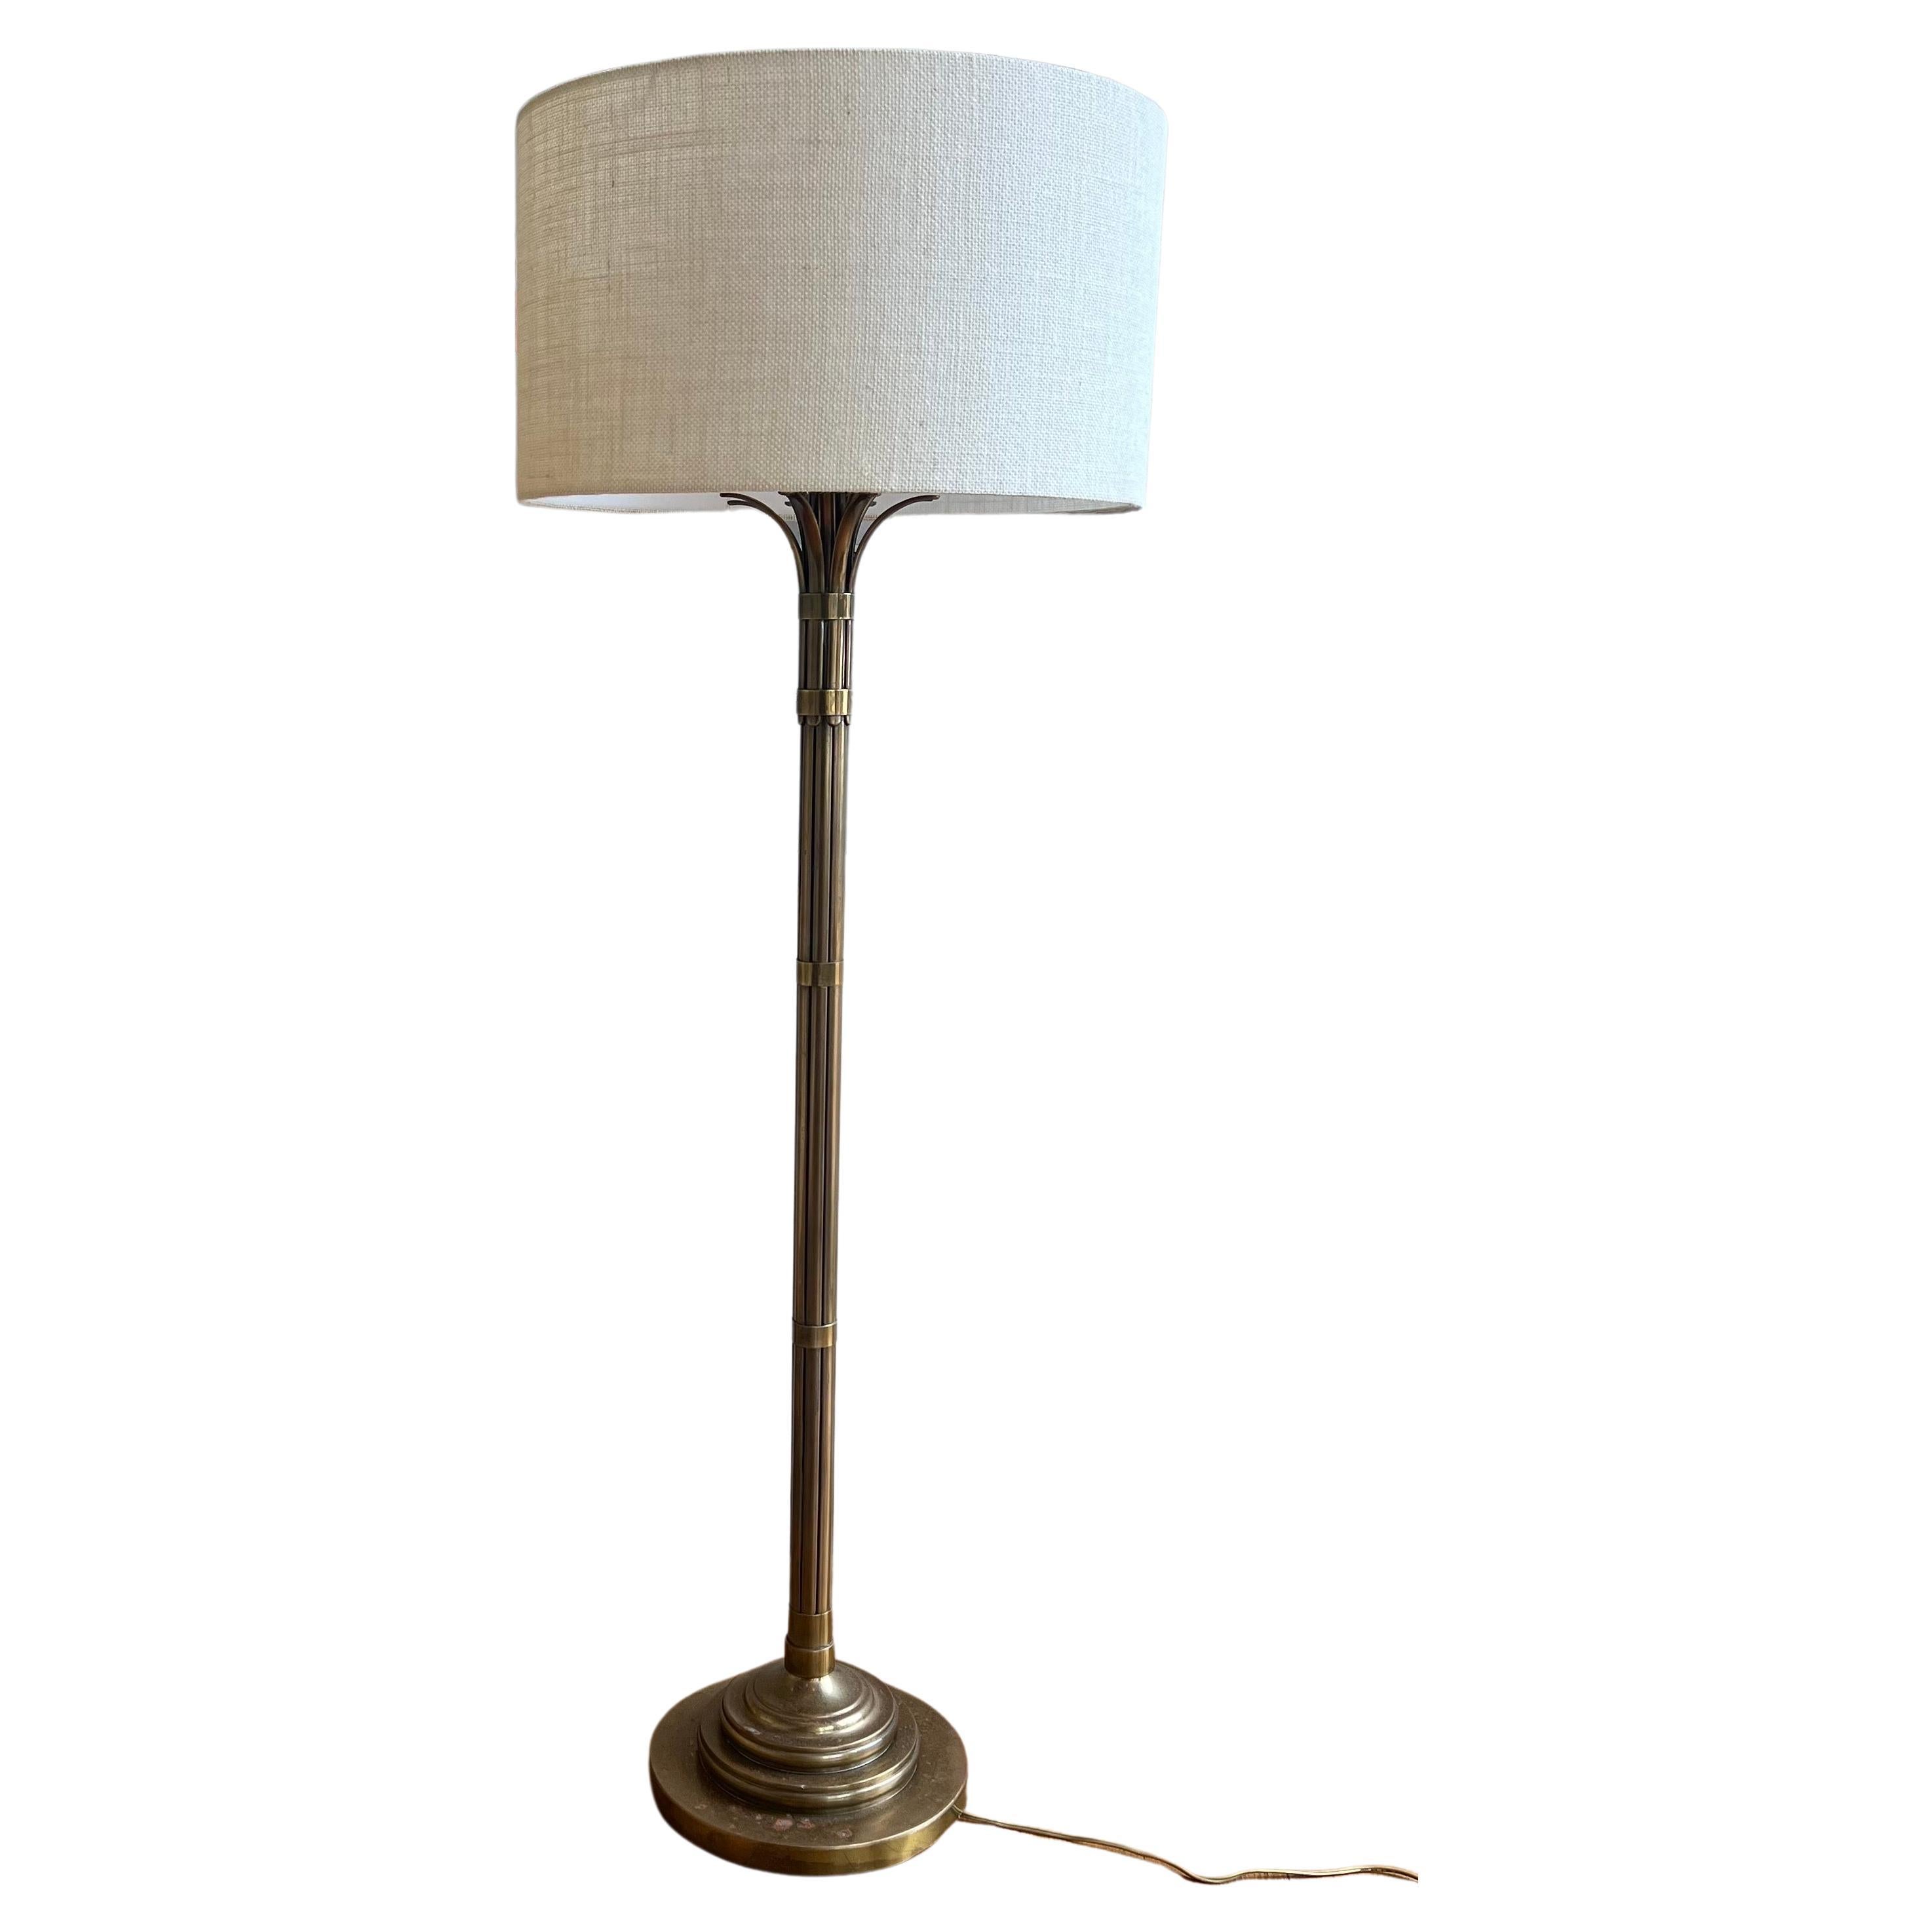 Striking solid patinated brass floor lamp, beautiful palm tree style very heavy great quality double side sockets, lampshade not included in working condition lamp shade not included, one of a kind piece very rare.